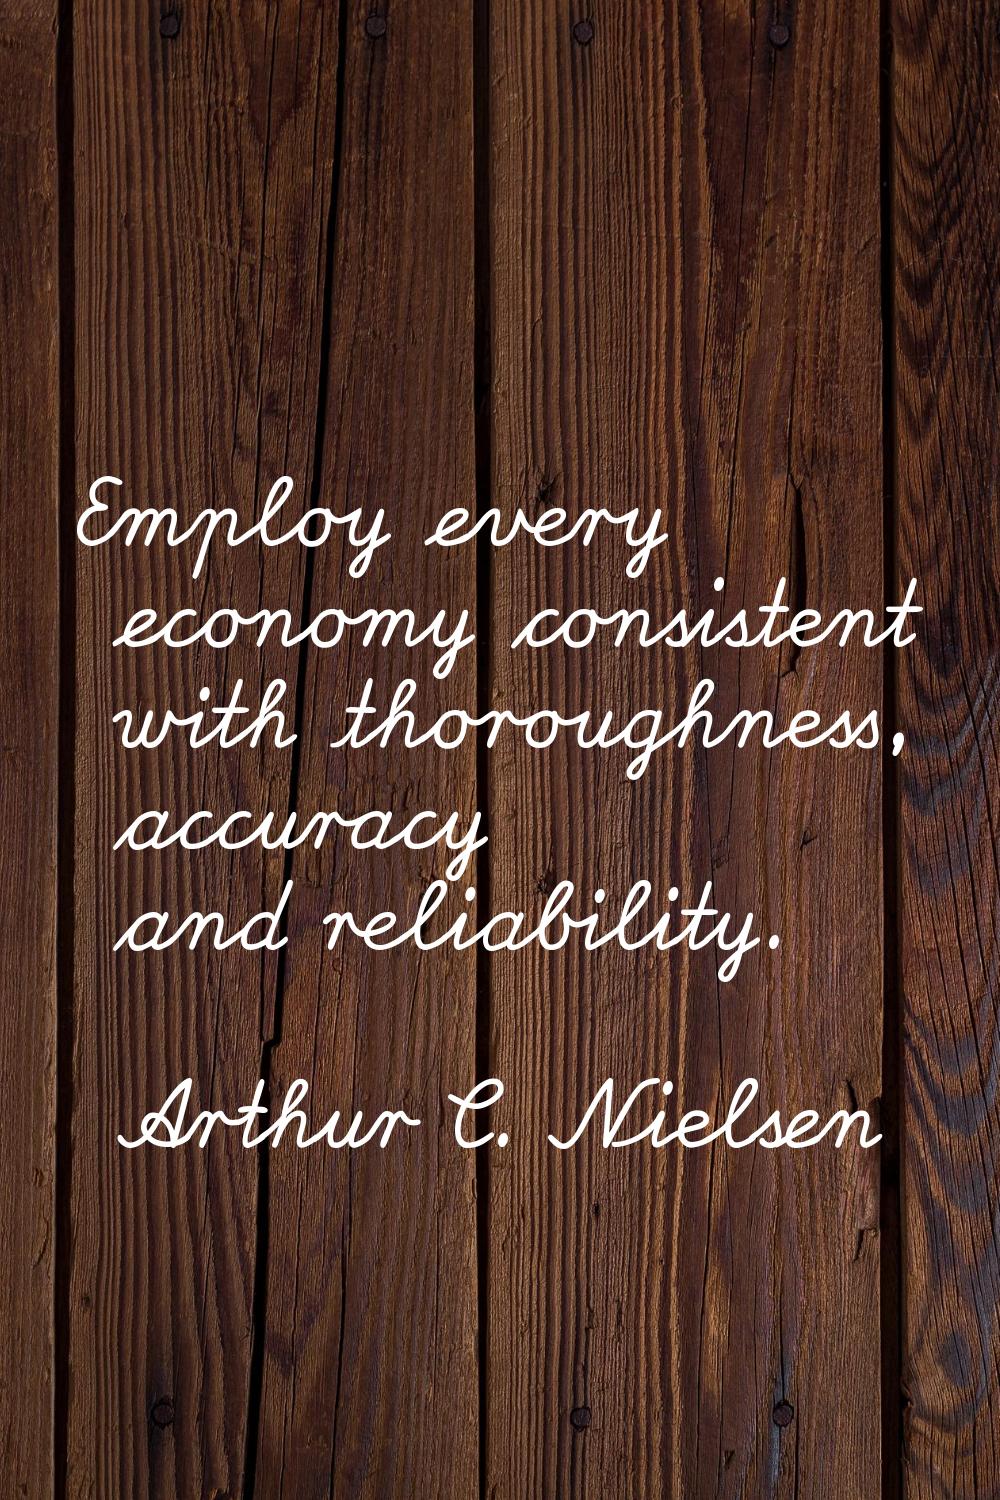 Employ every economy consistent with thoroughness, accuracy and reliability.